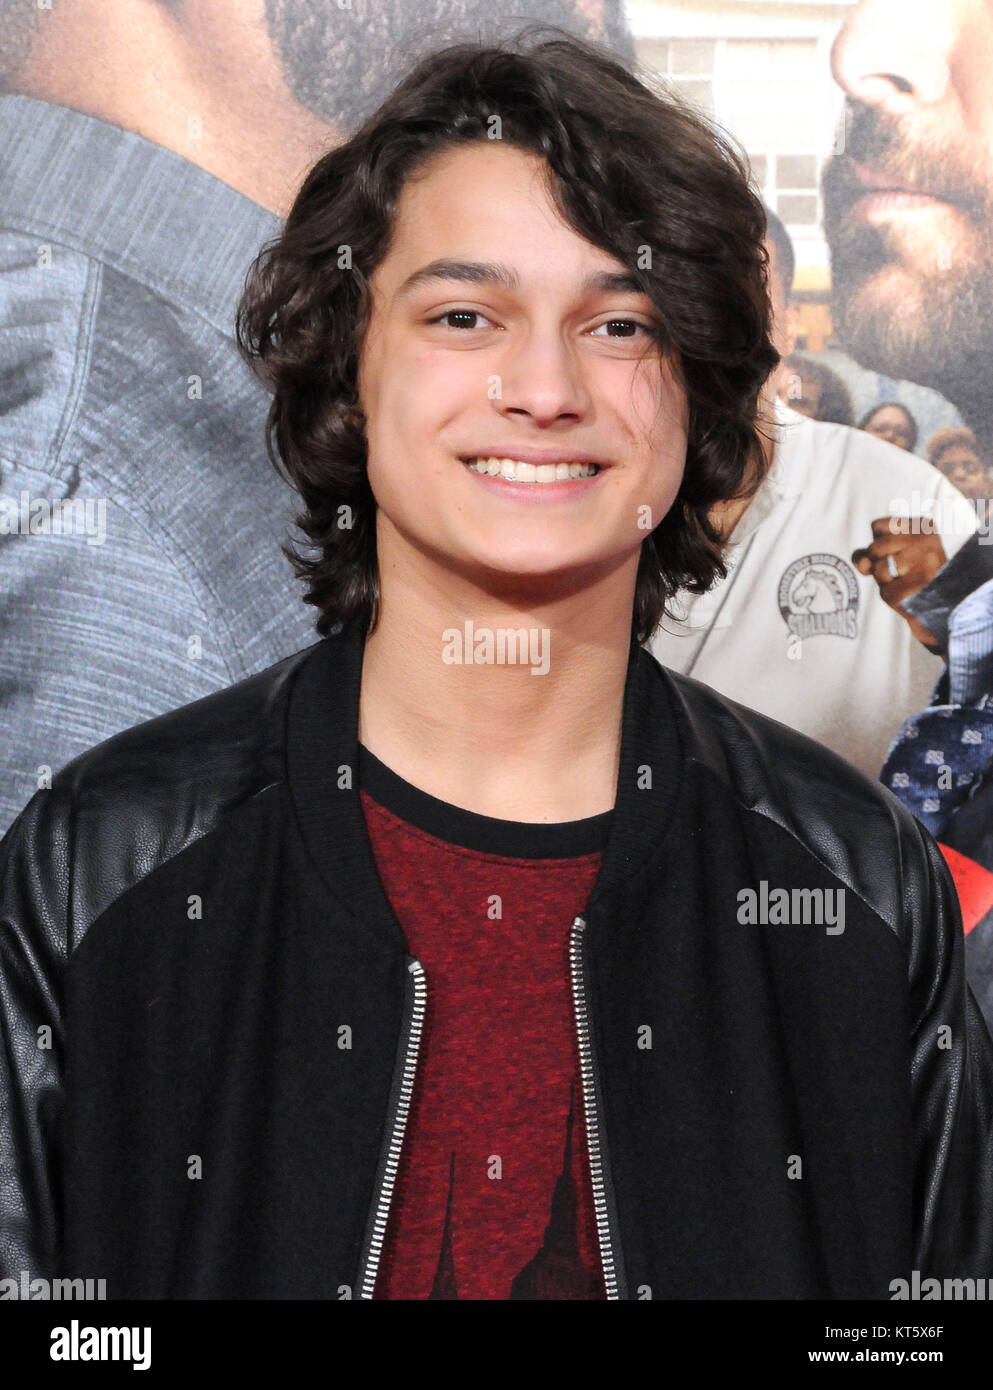 LOS ANGELES, CA - FEBRUARY 13: Actor Rio Mangini attends the world premeire of 'Fist Fight' at Regency Village Theatre on February 13, 2017 in Los Angeles, California. Photo by Barry King/Alamy Stock Photo Stock Photo